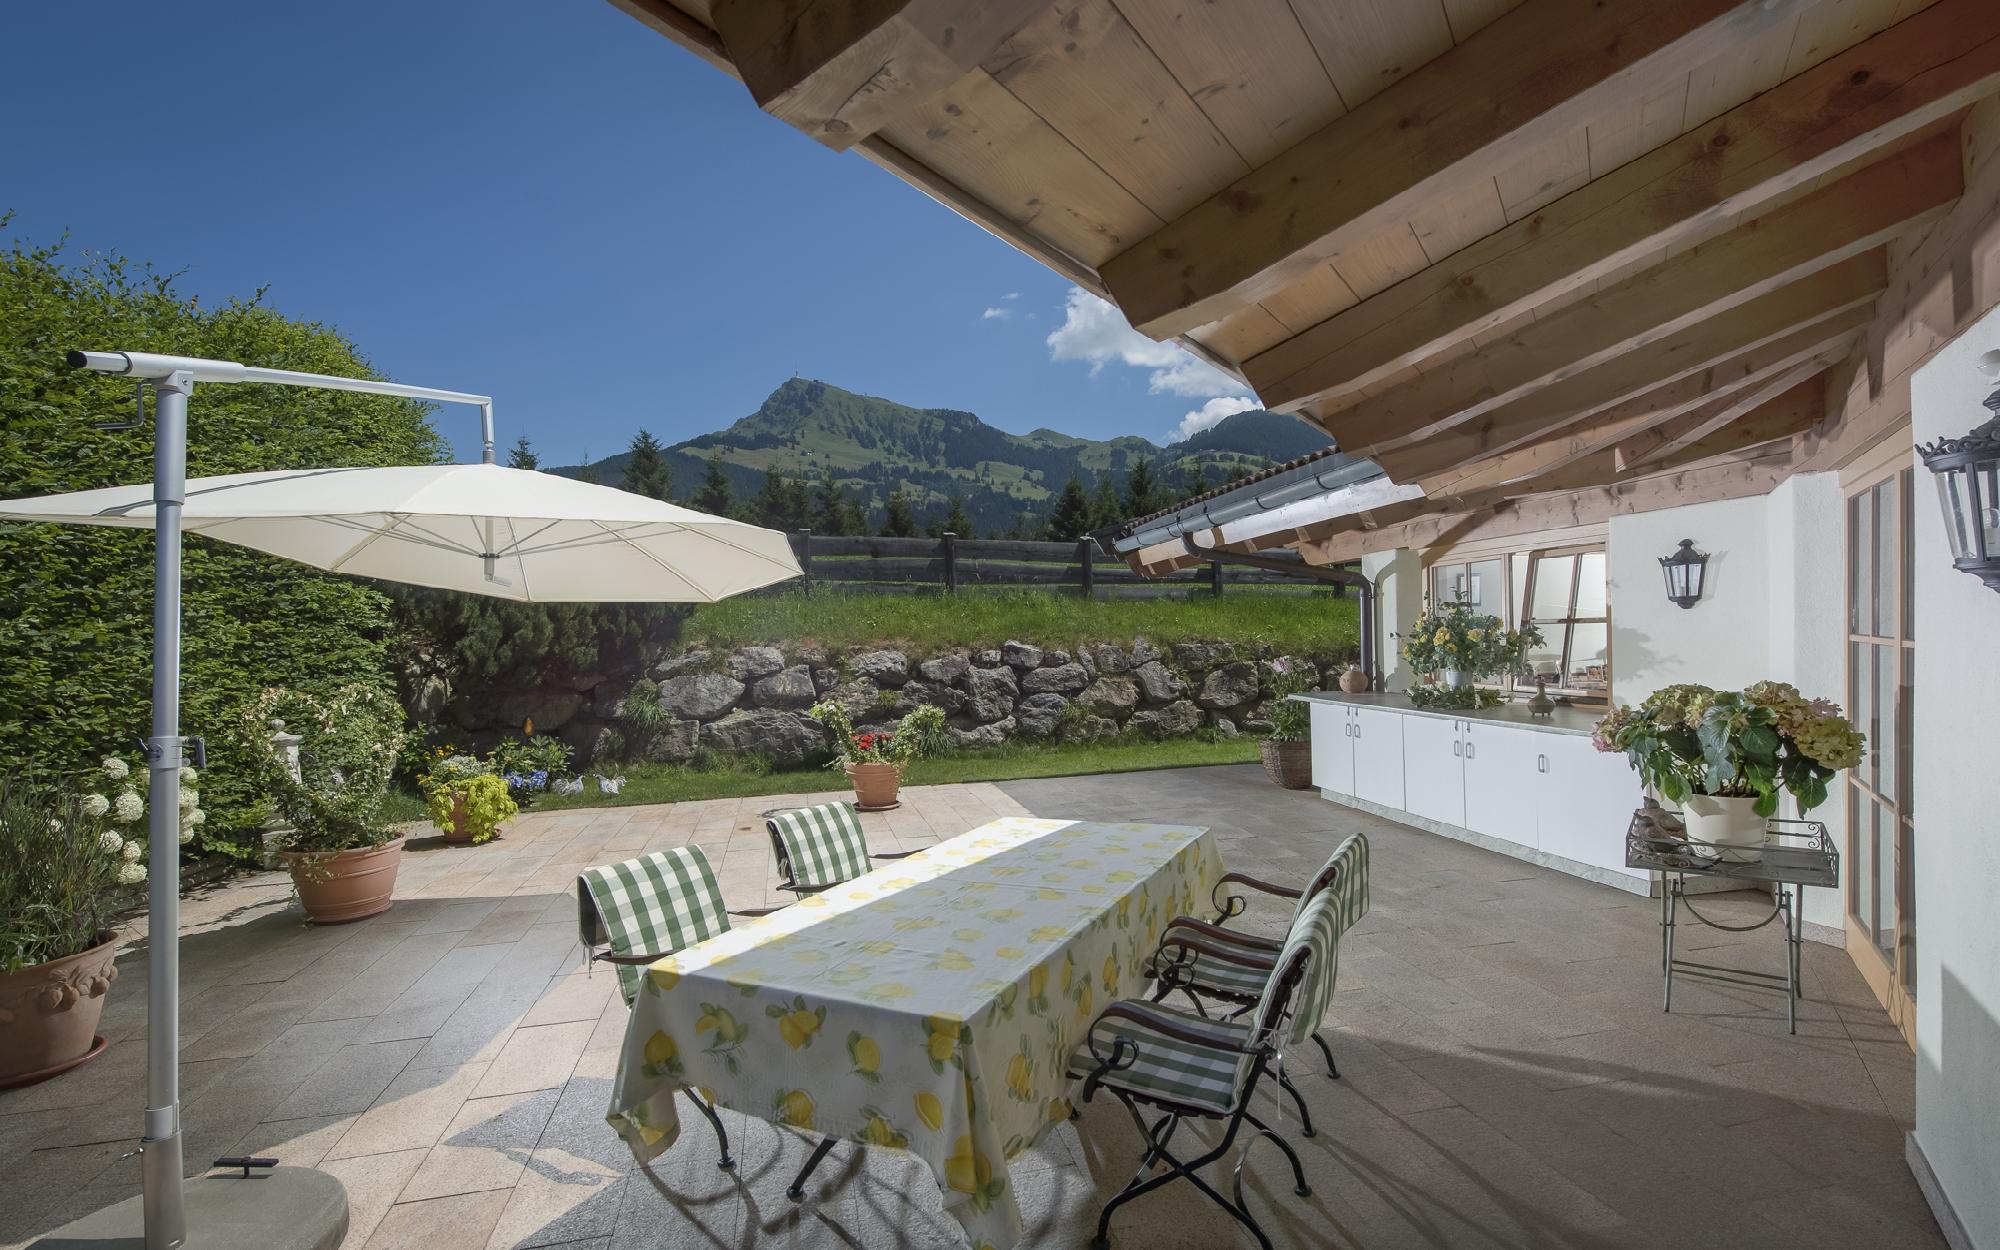 Villa in an excellent location in residential area of Kitzbühel for Sale